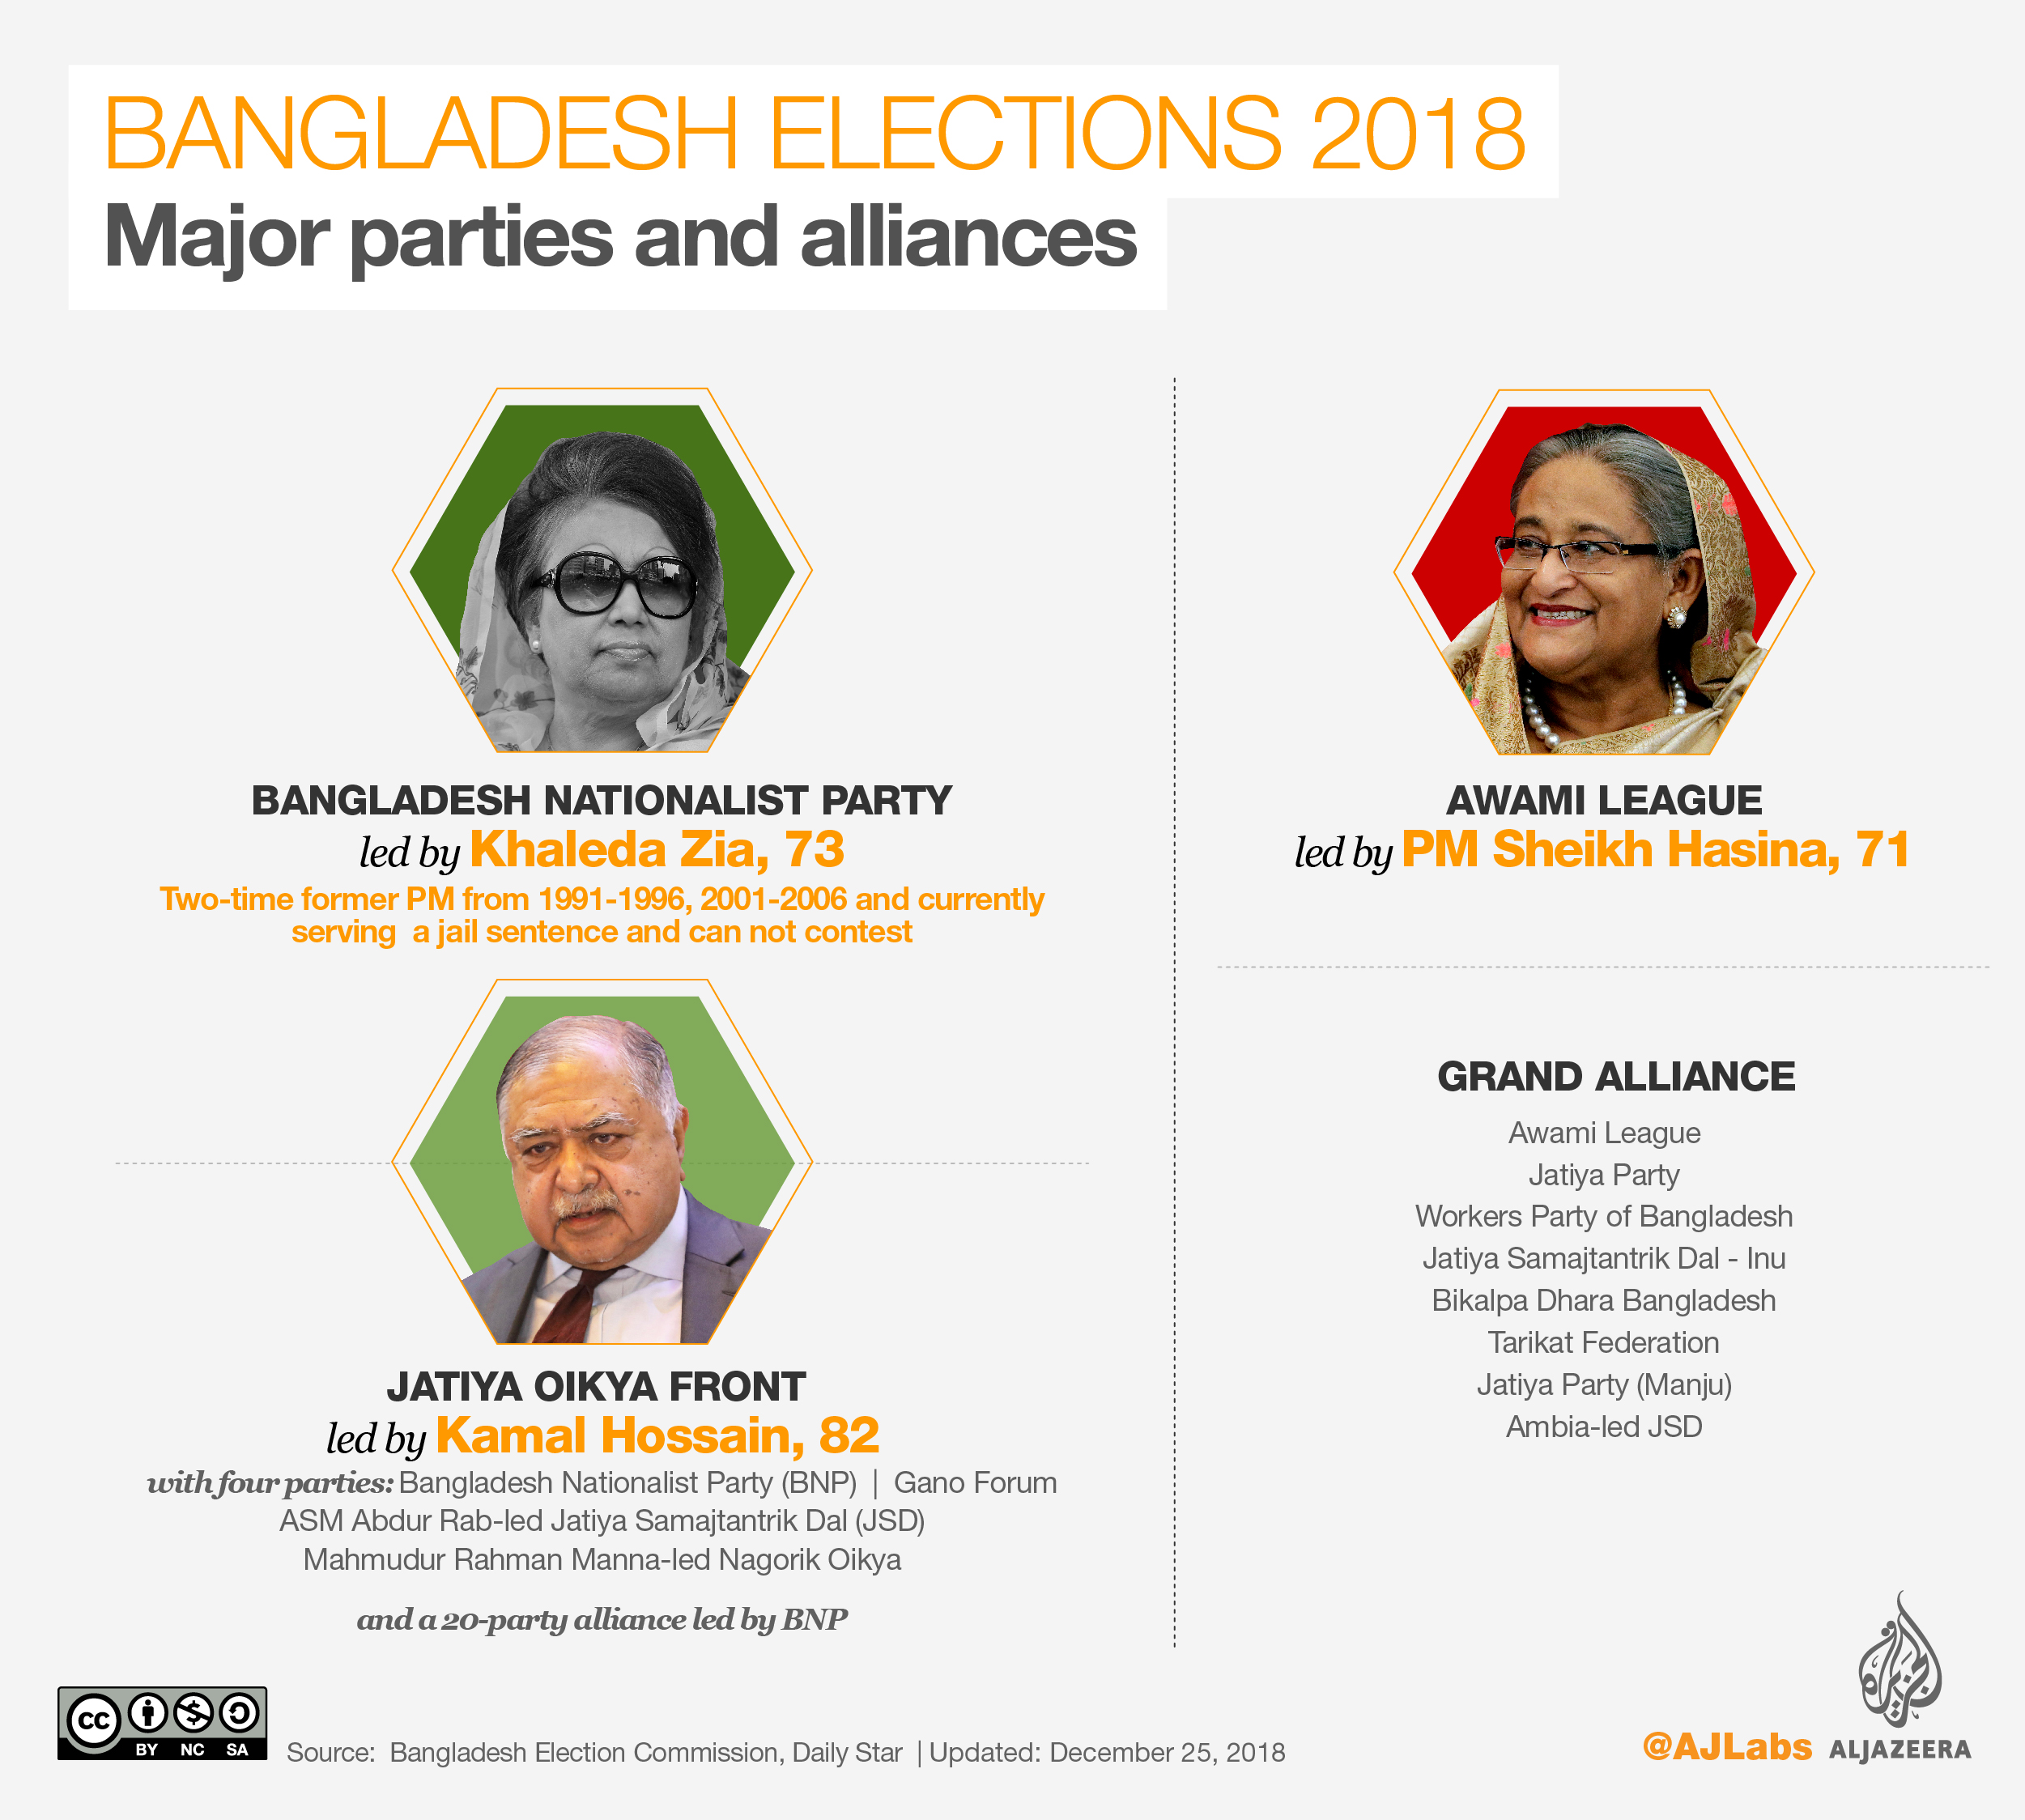 Hasina and Zia have alternated in power for most of the past three decades [Al Jazeera]